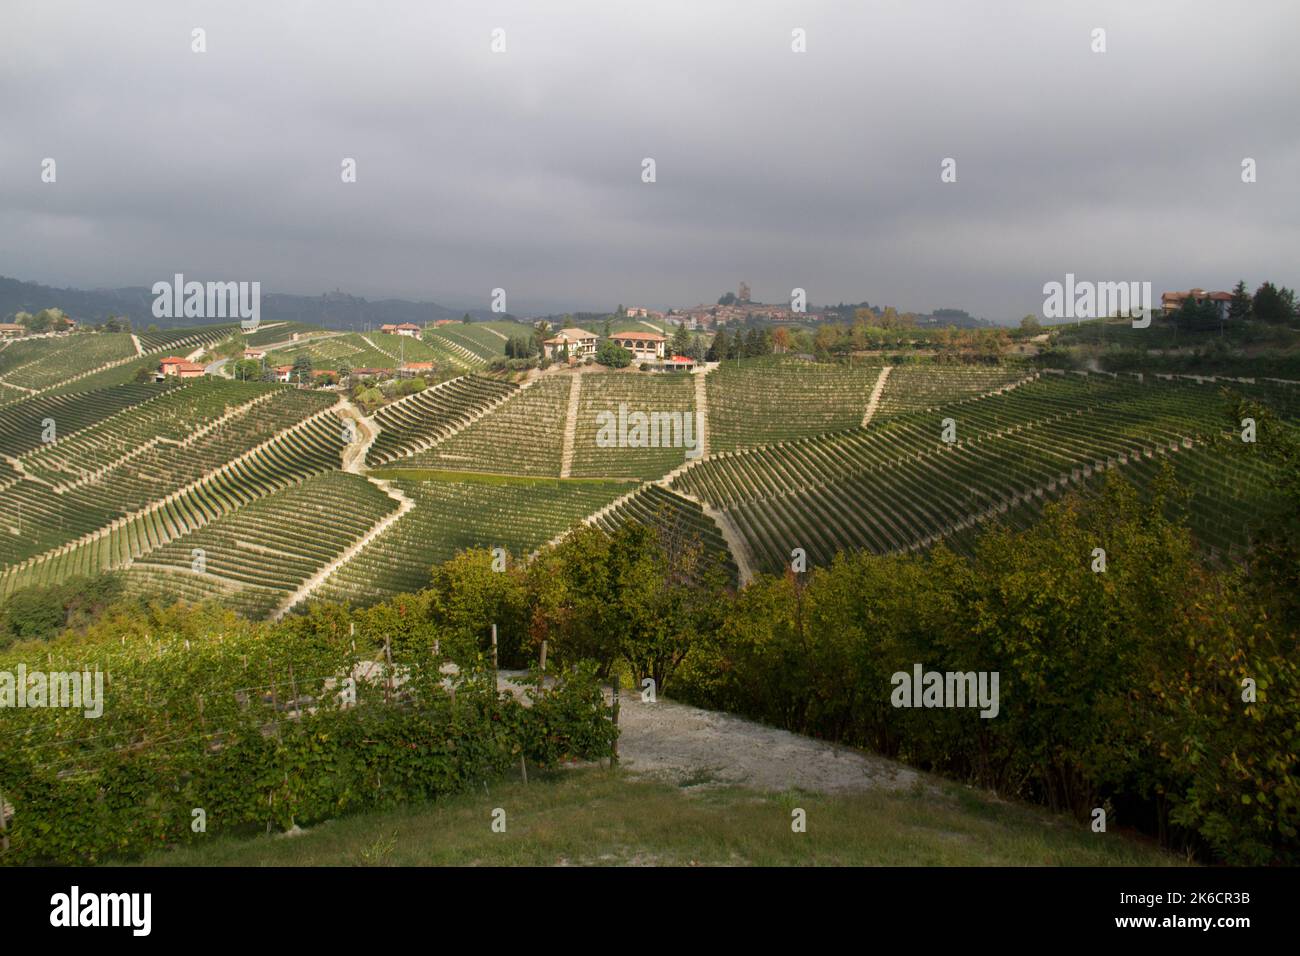 Hilly landscape with vineyards in Tuscany, Italy Stock Photo